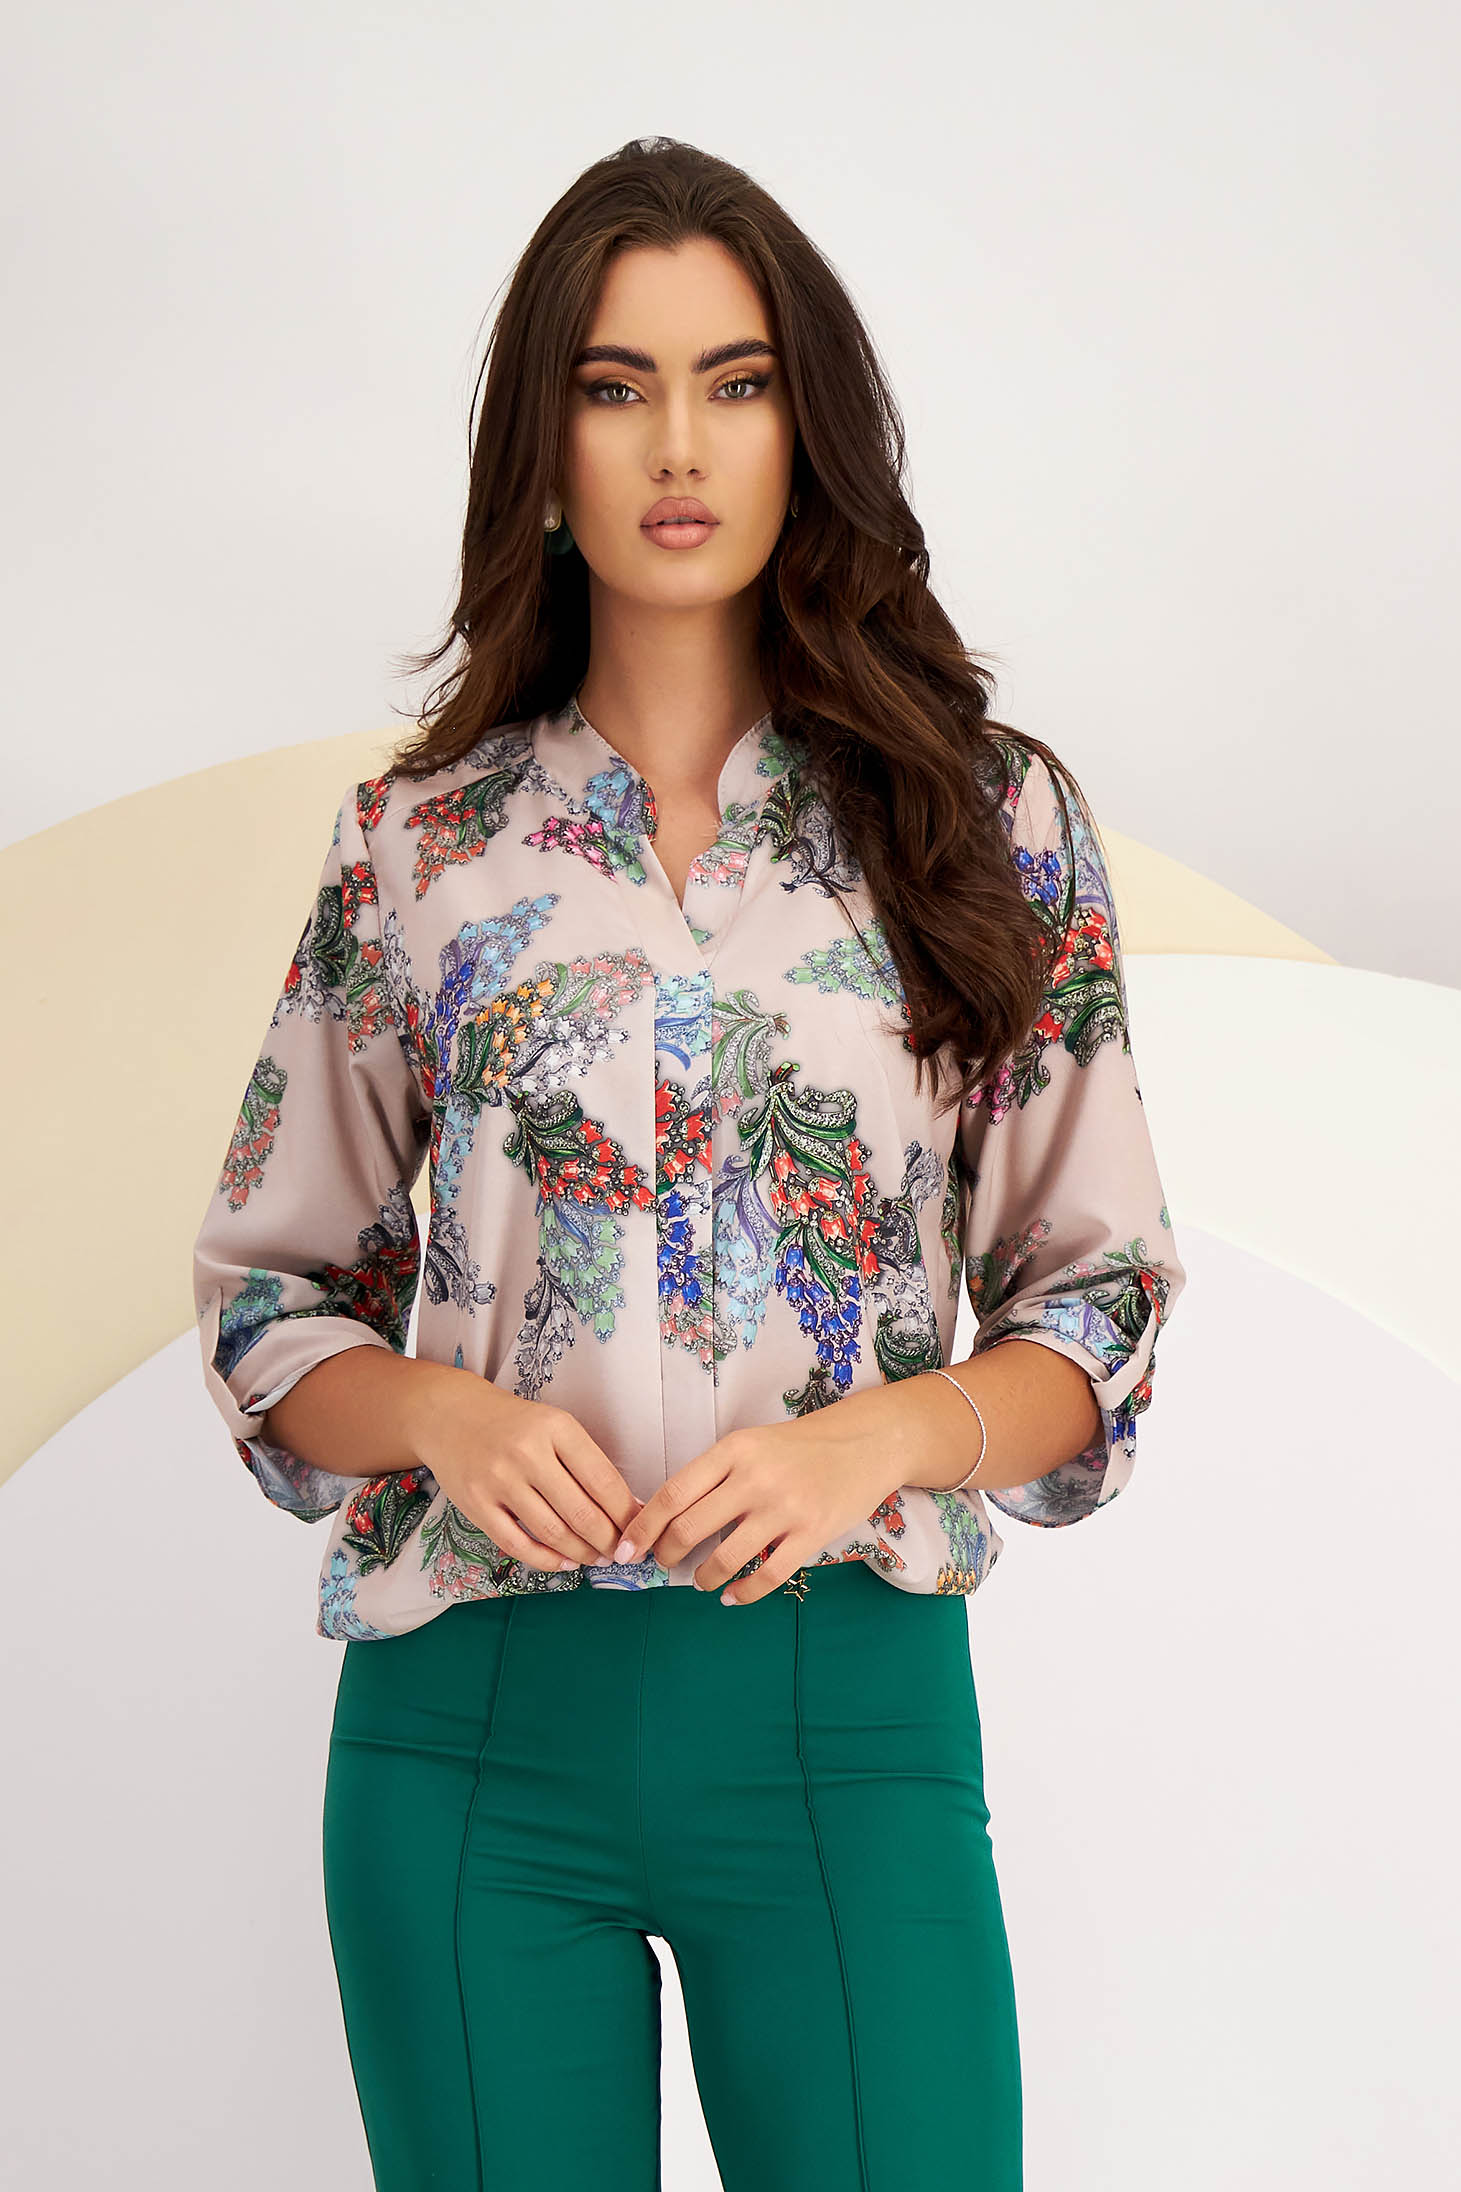 Lady's blouse made of thin material with a loose fit and Russian collar - Lady Pandora